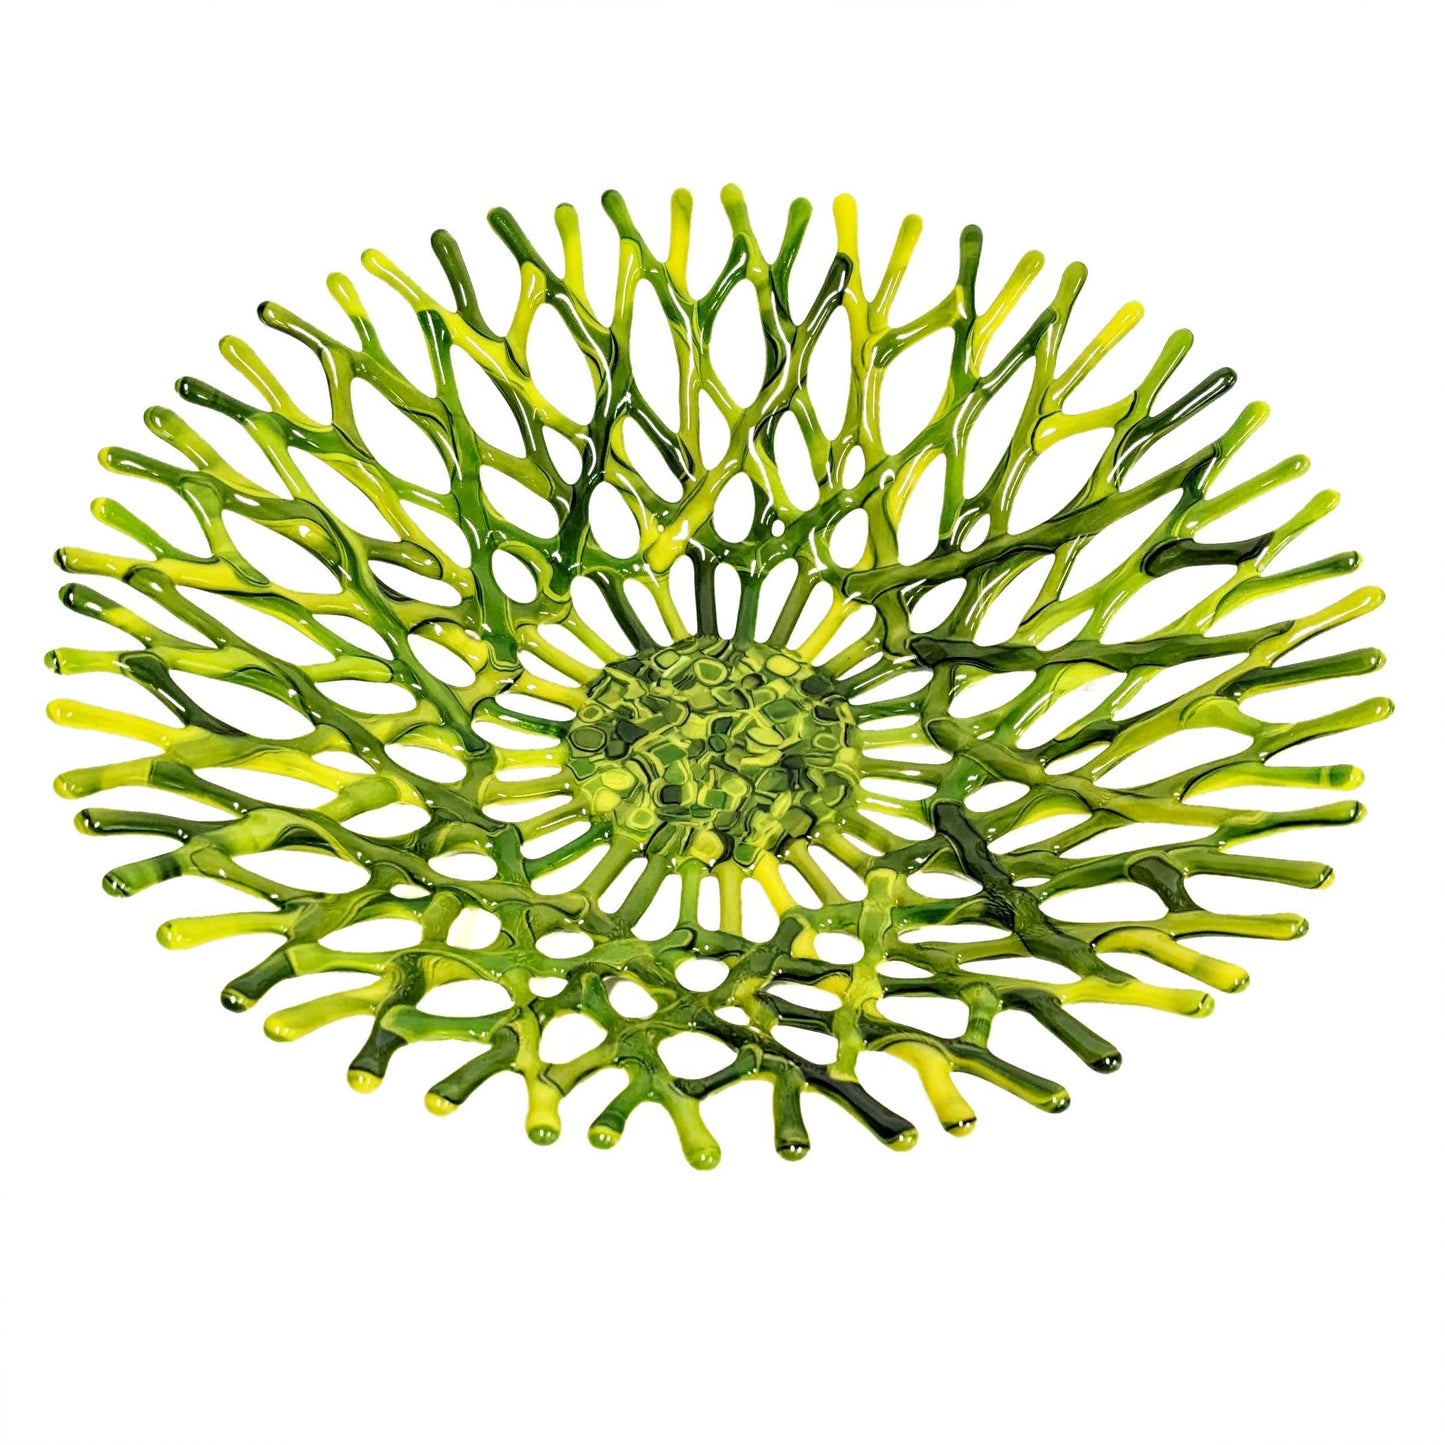 Glass Art Coral Fruit Bowl in Green and Yellow